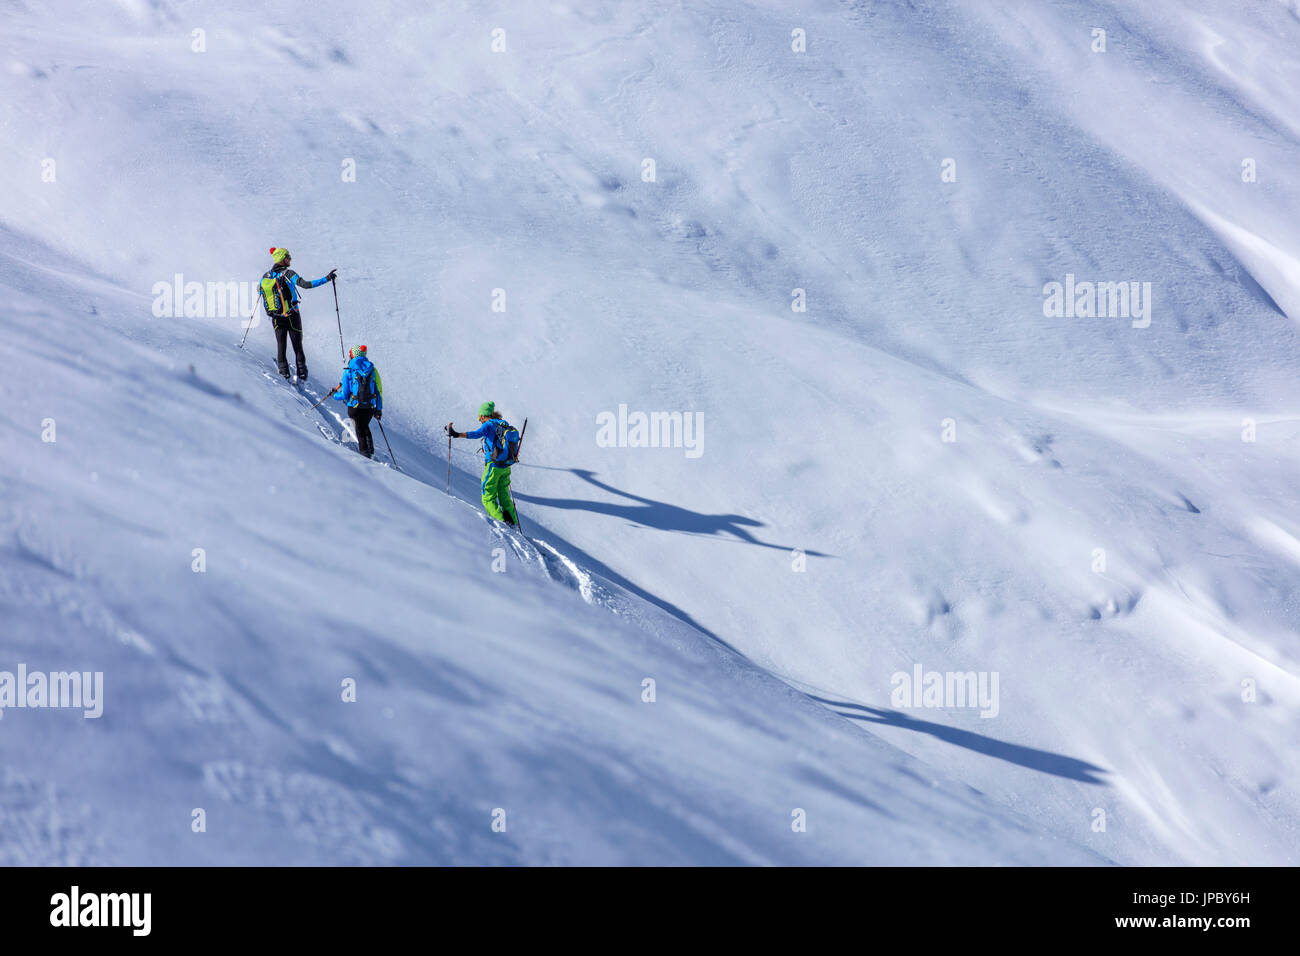 Alpine skiers proceed at high altitude on a sunny day in the snowy landscape Stelvio Pass Valtellina Lombardy Italy Europe Stock Photo